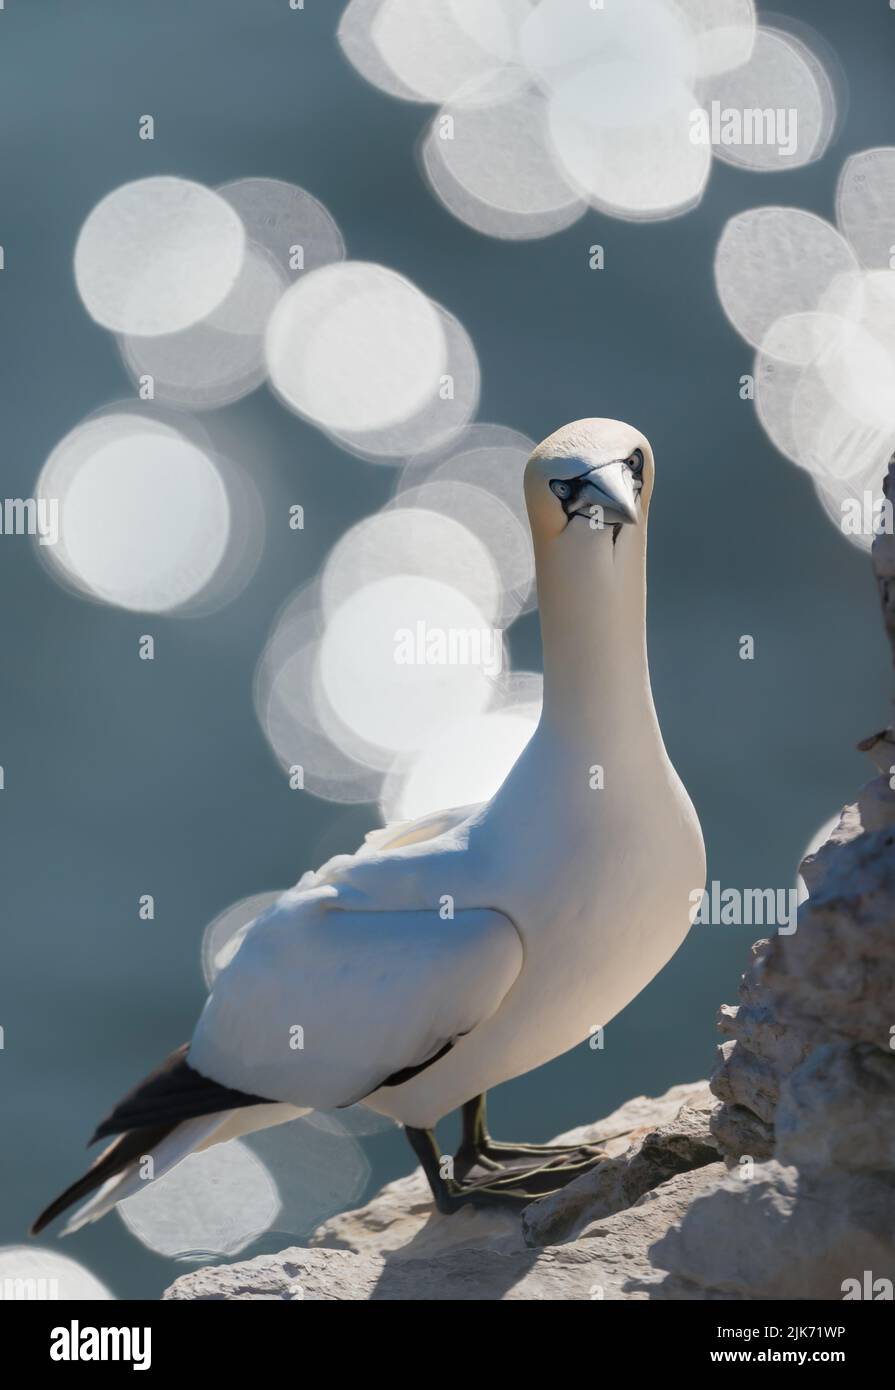 Close up of a Northern gannet (Morus bassana) perched on an edge of a cliff against bokeh background, Bempton cliffs, UK. Stock Photo